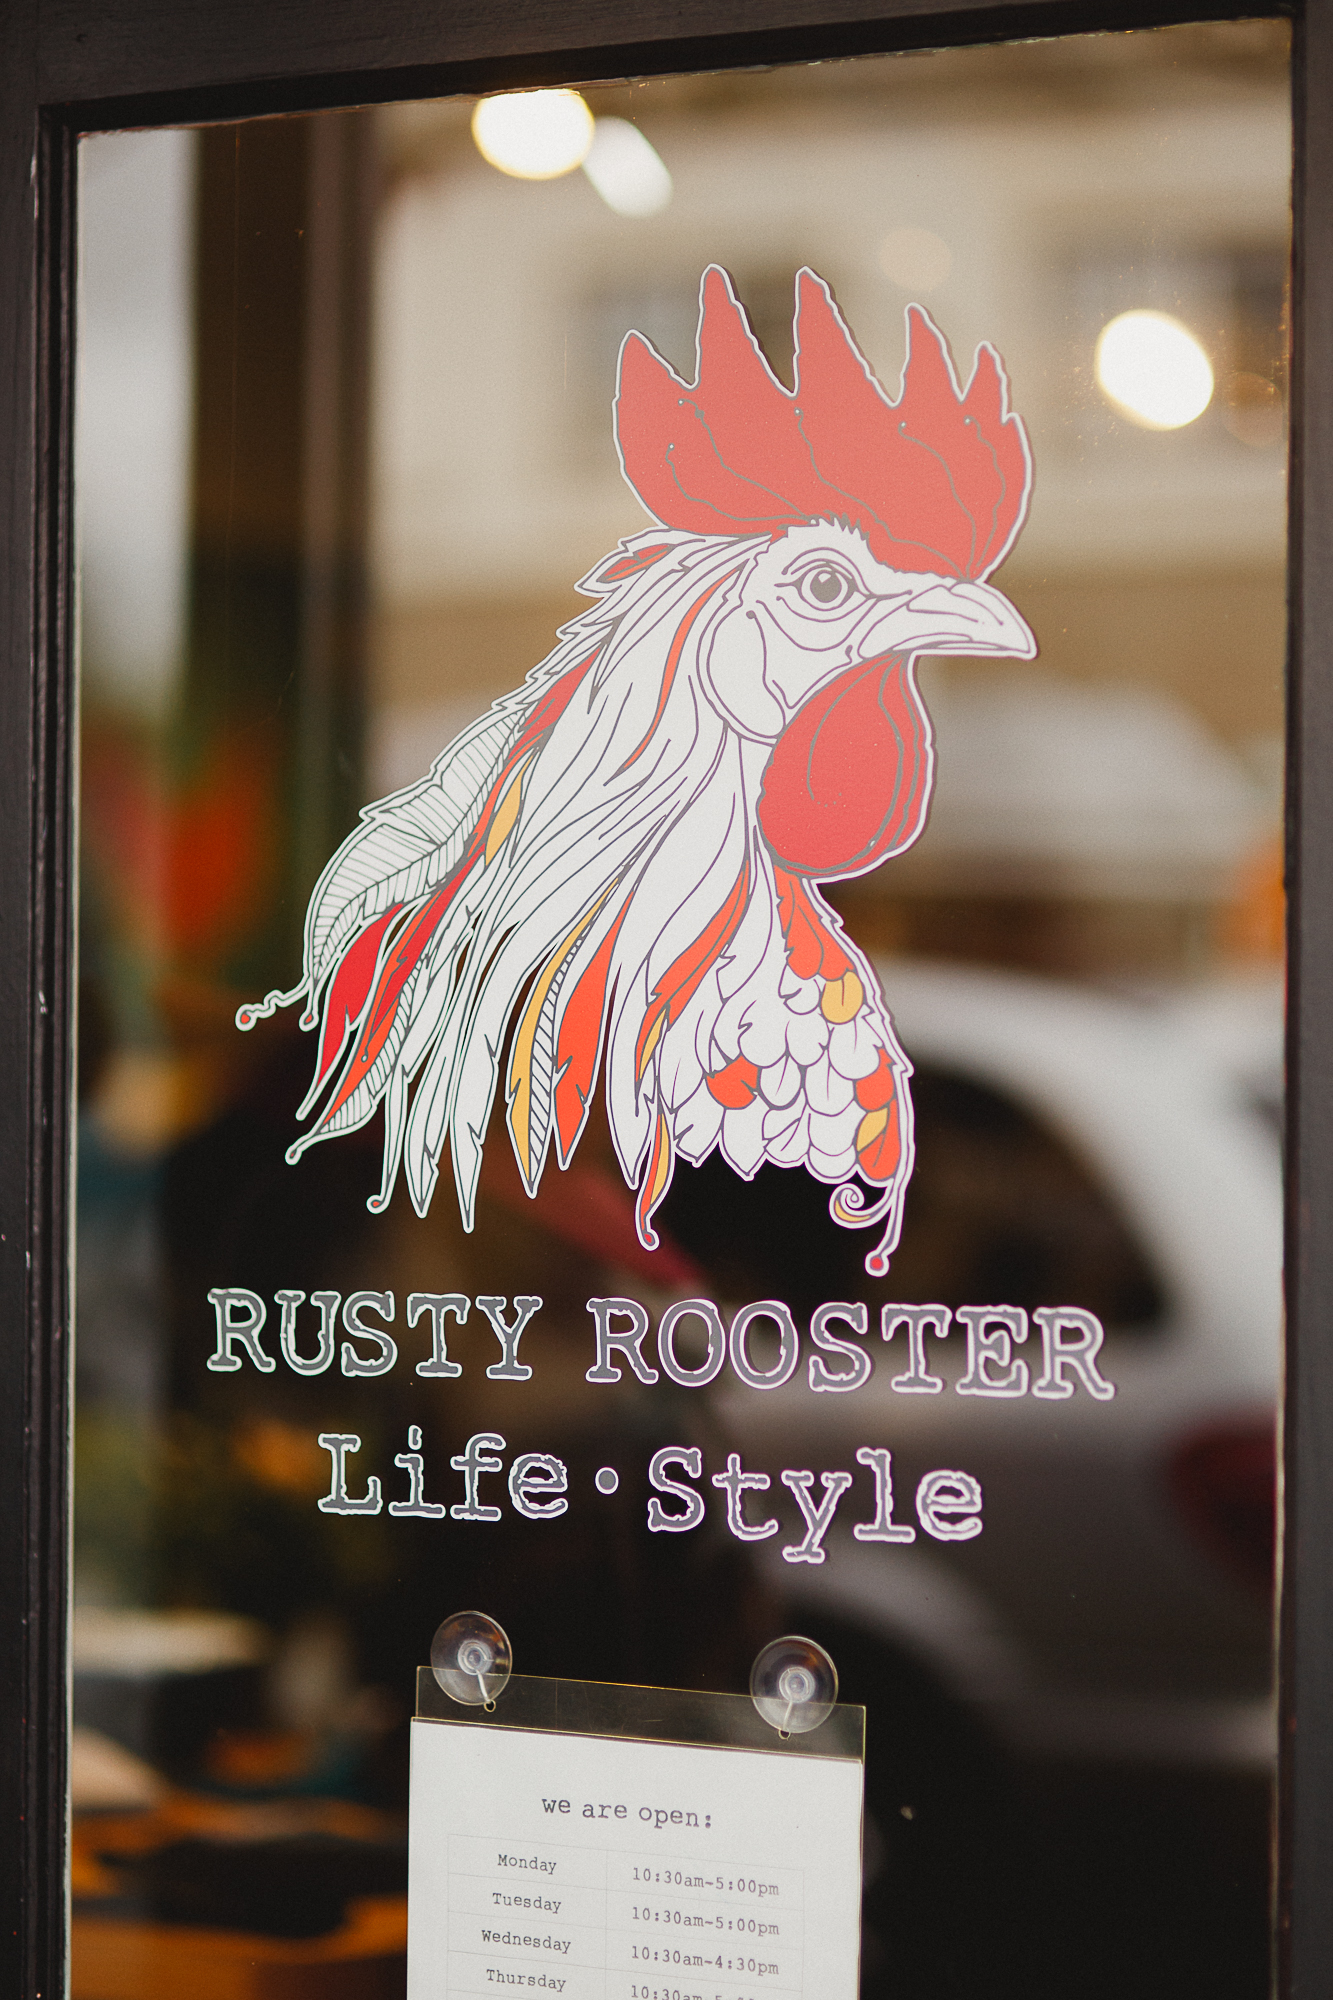 rusty rooster life.style cumberland bc - paola brodsgaard - smoking lily - hunter boots - weareyqq - comox valley - vancouver island small shop - paola brodsgaard - IMG_9854.jpg